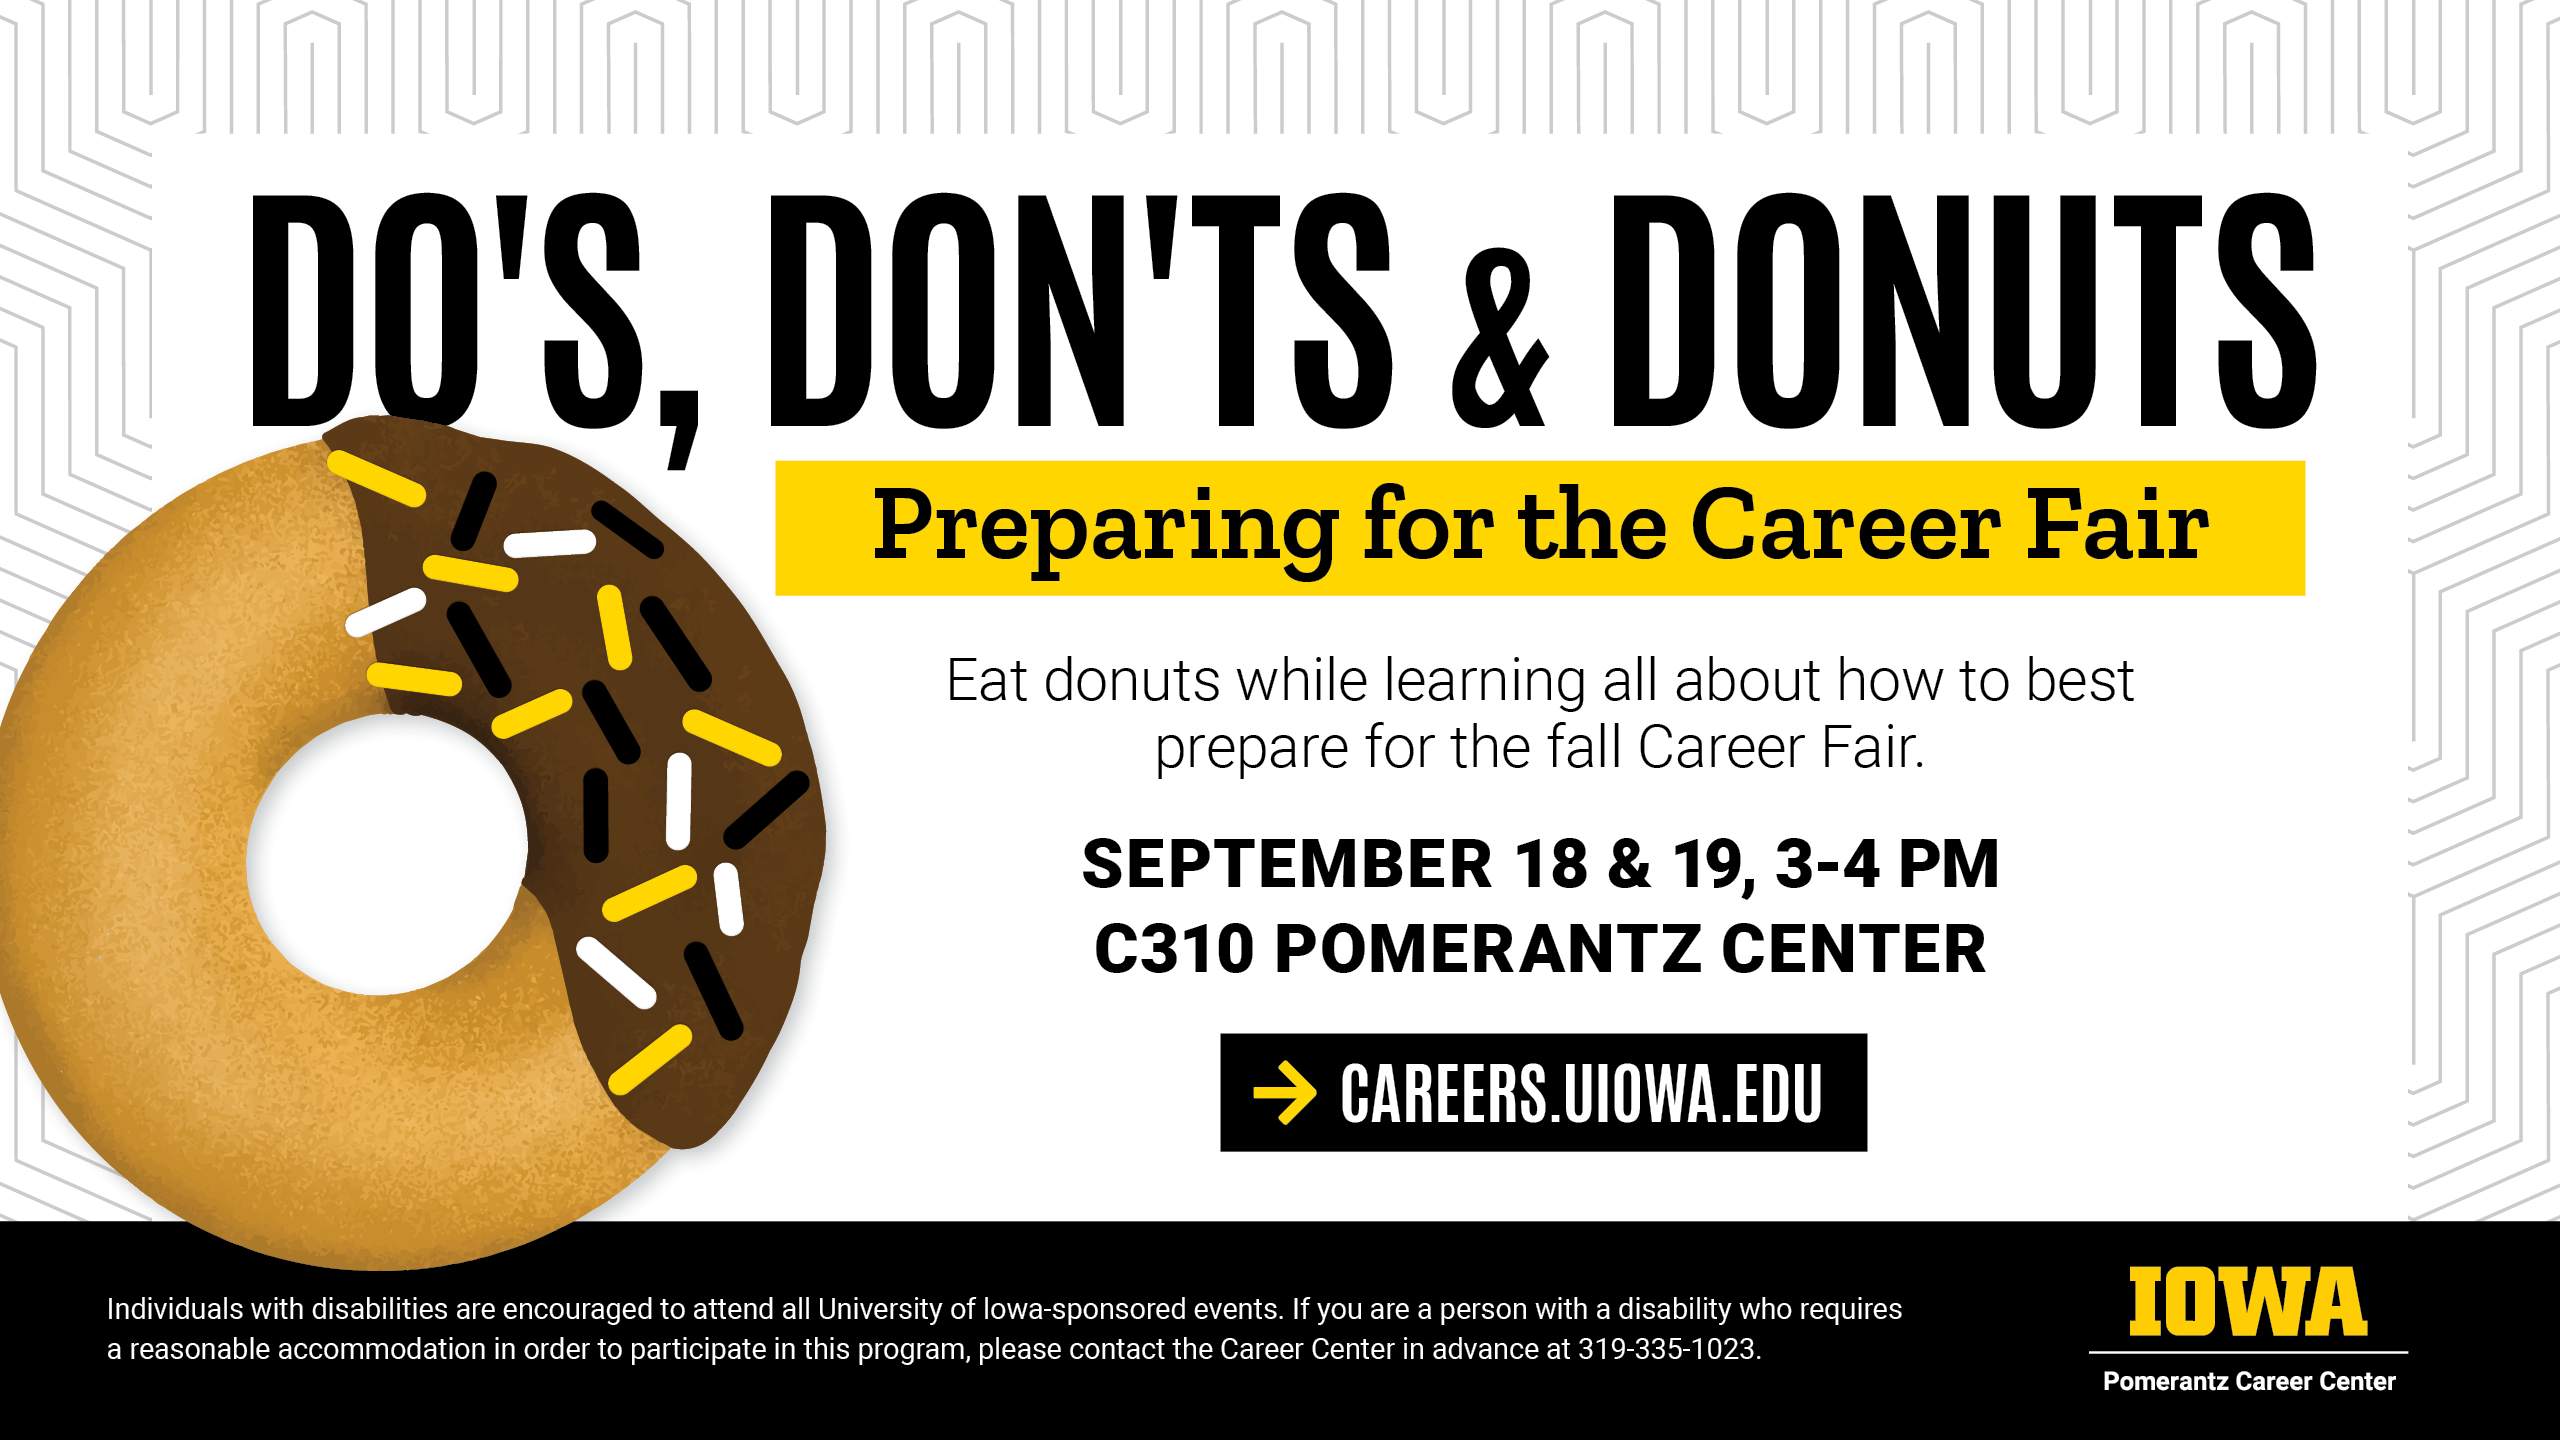 Dos, don'ts, and donuts. Preparing for the career fair. Eat donuts while learning all about how to best prepare for the fall career fair. September 18 and 19 from 3 to 4 pm in C310 Pomerantz Center. Careers dot uiowa dot edu for more info.